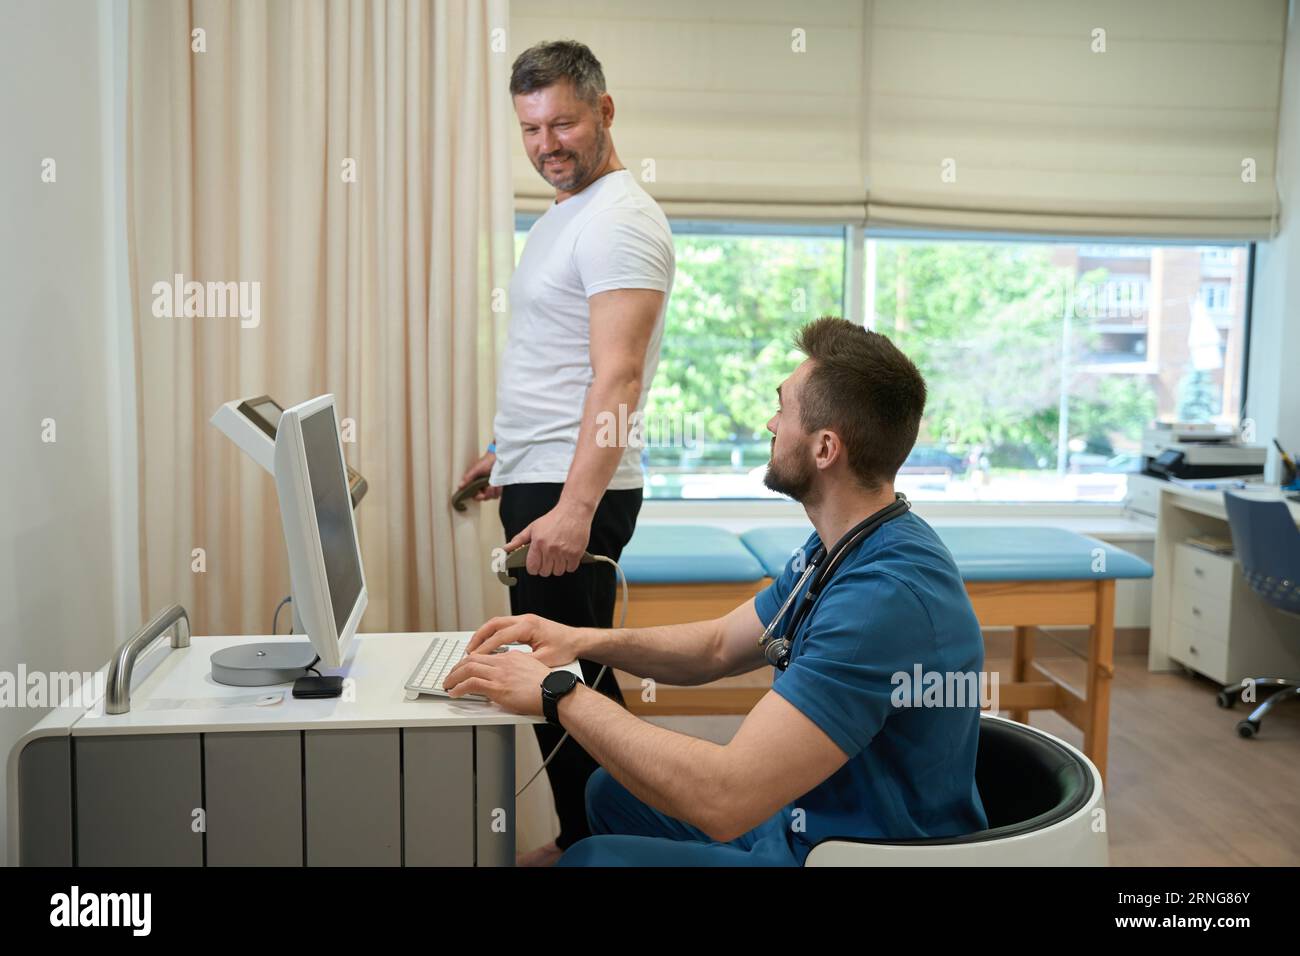 https://c8.alamy.com/comp/2RNG86Y/man-undergoing-body-composition-analysis-supervised-by-healthcare-professional-2RNG86Y.jpg